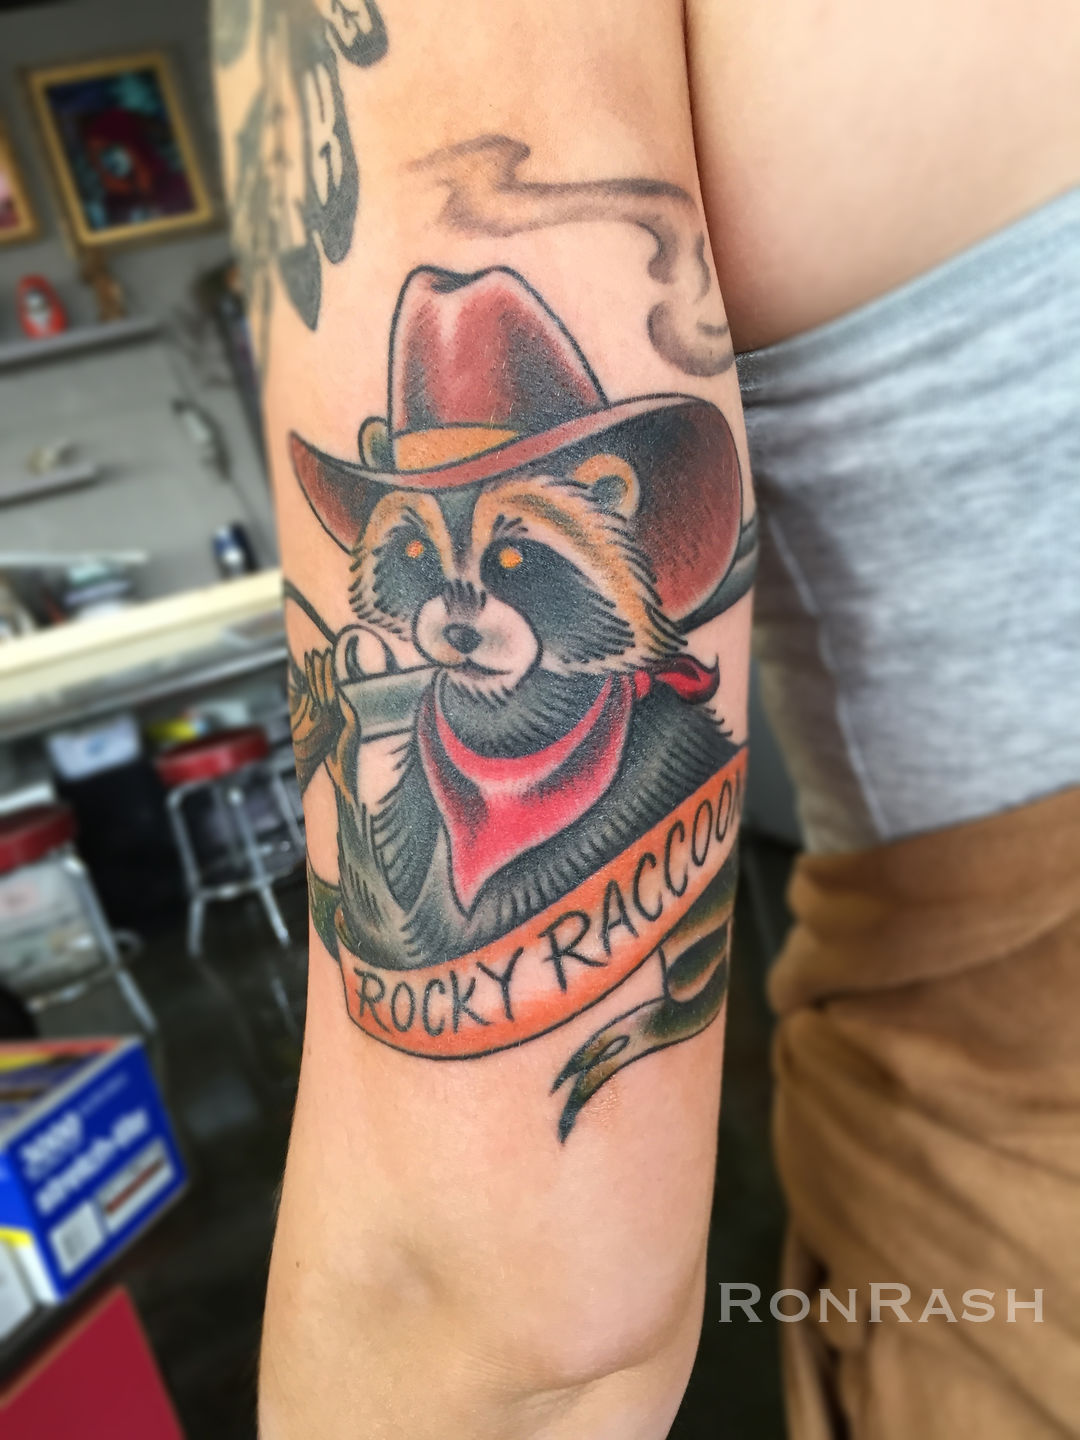 The Artistic Appeal Of Cowboy Raccoon Tattoos